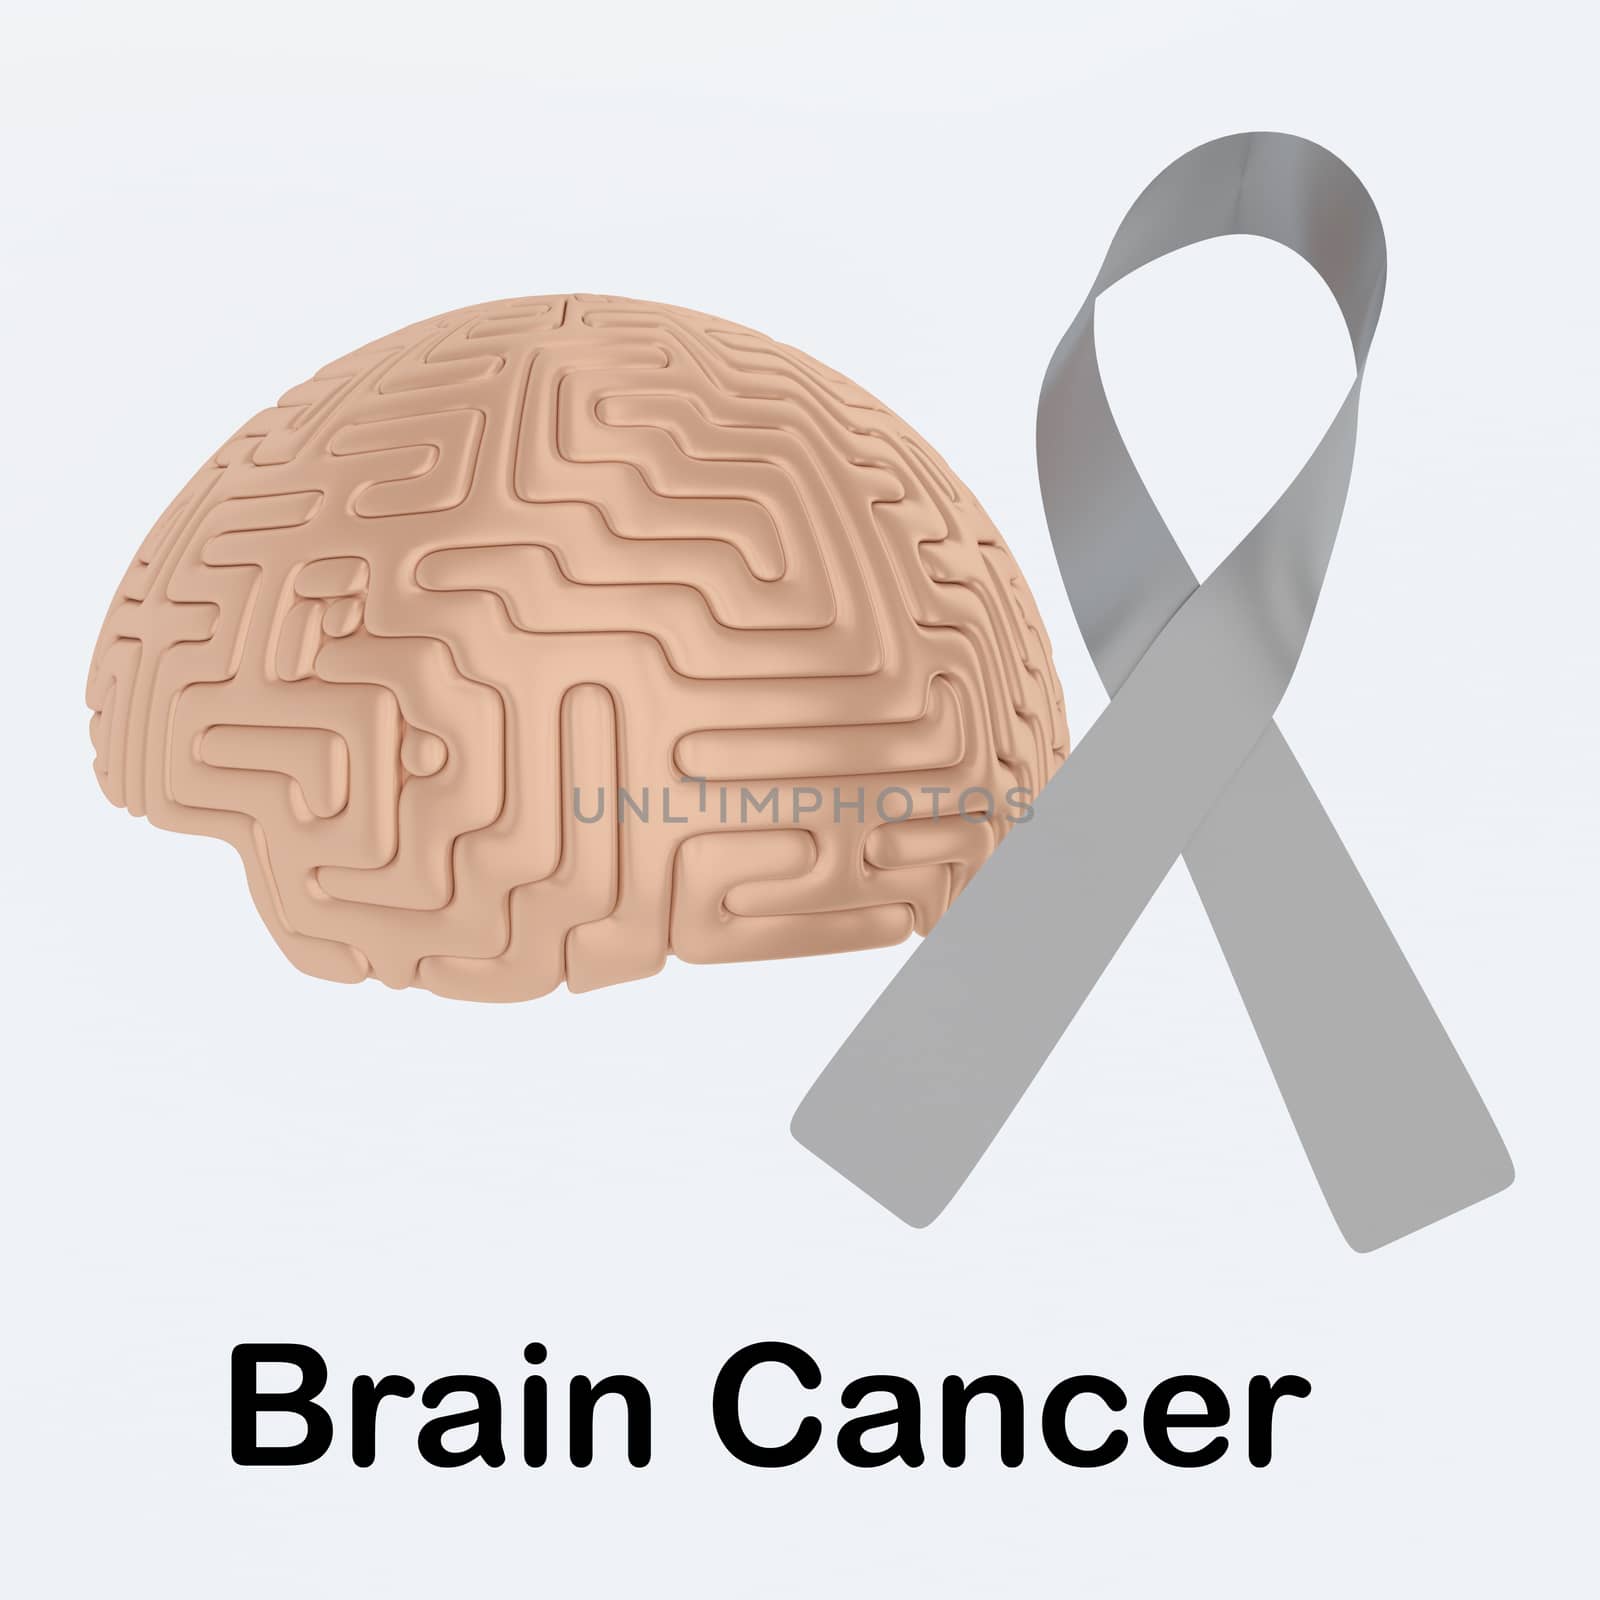 3D illustration BRAIN CANCER script below an awareness ribbon of lung cancer and human brain, isolated over pale blue background.